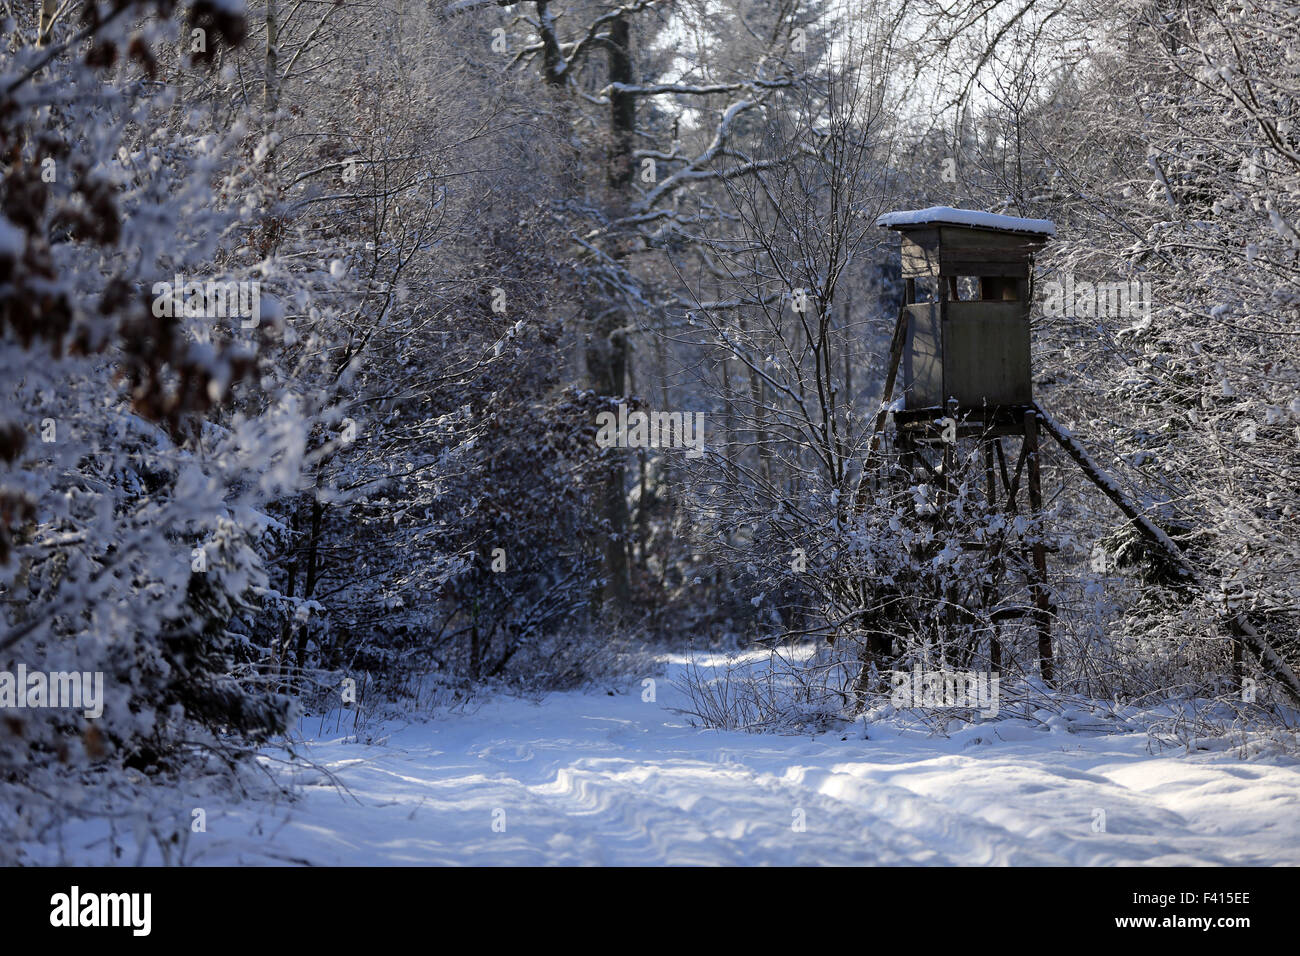 Deer stand in Bavarian winter forest Stock Photo